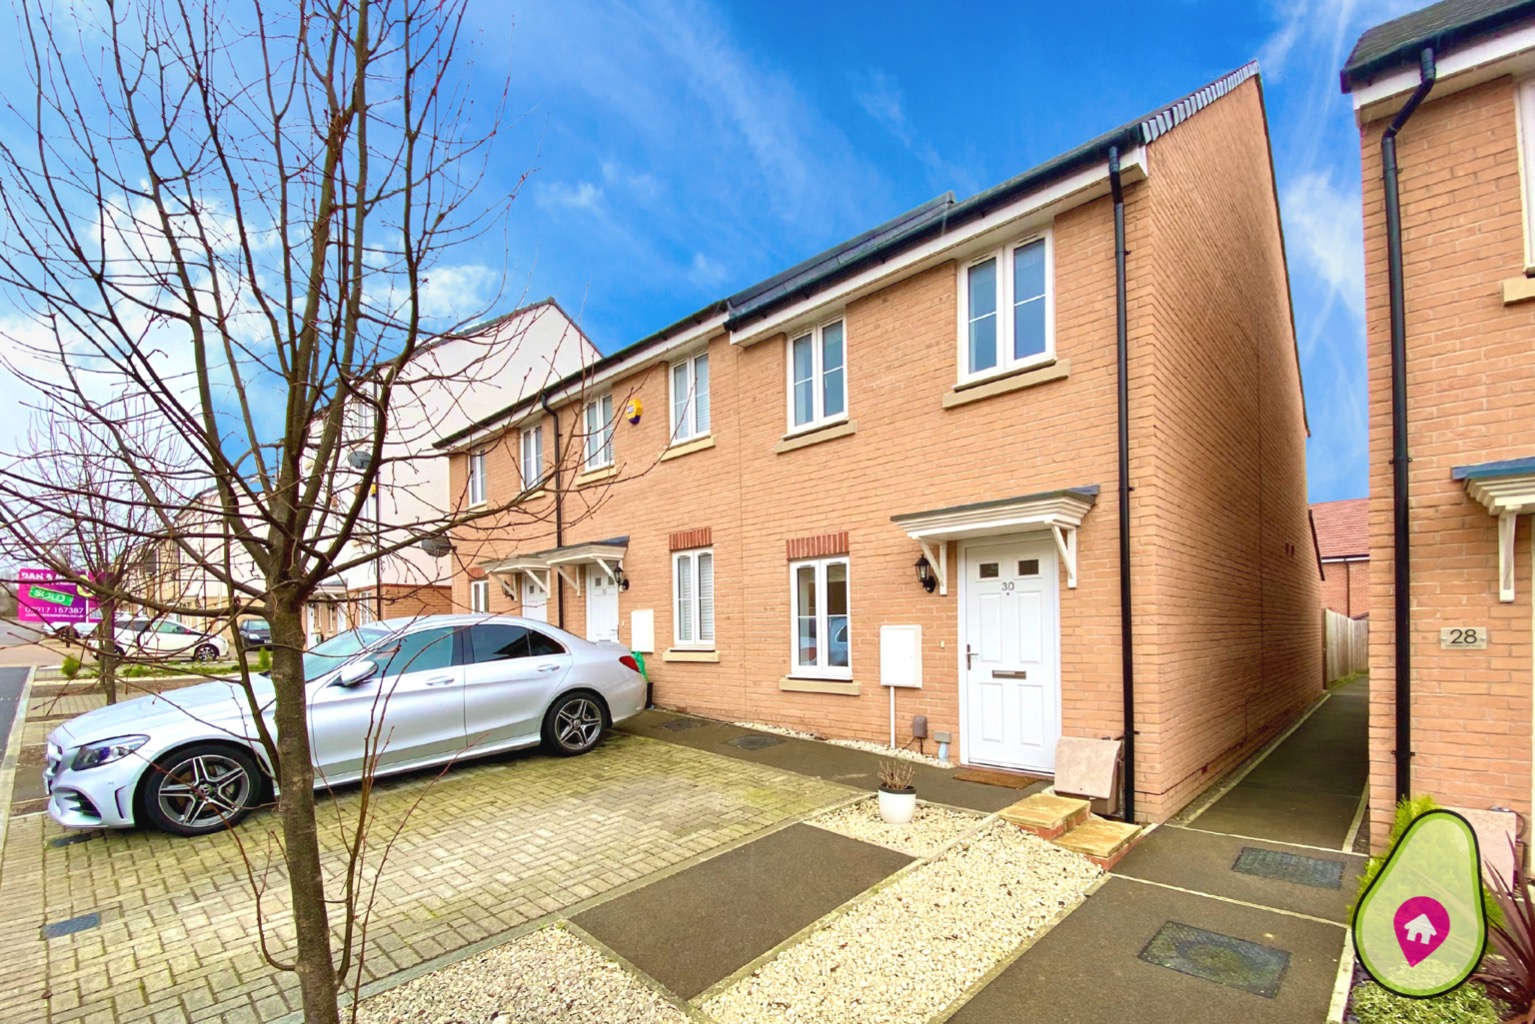 2 bed end of terrace house for sale - Property Image 1